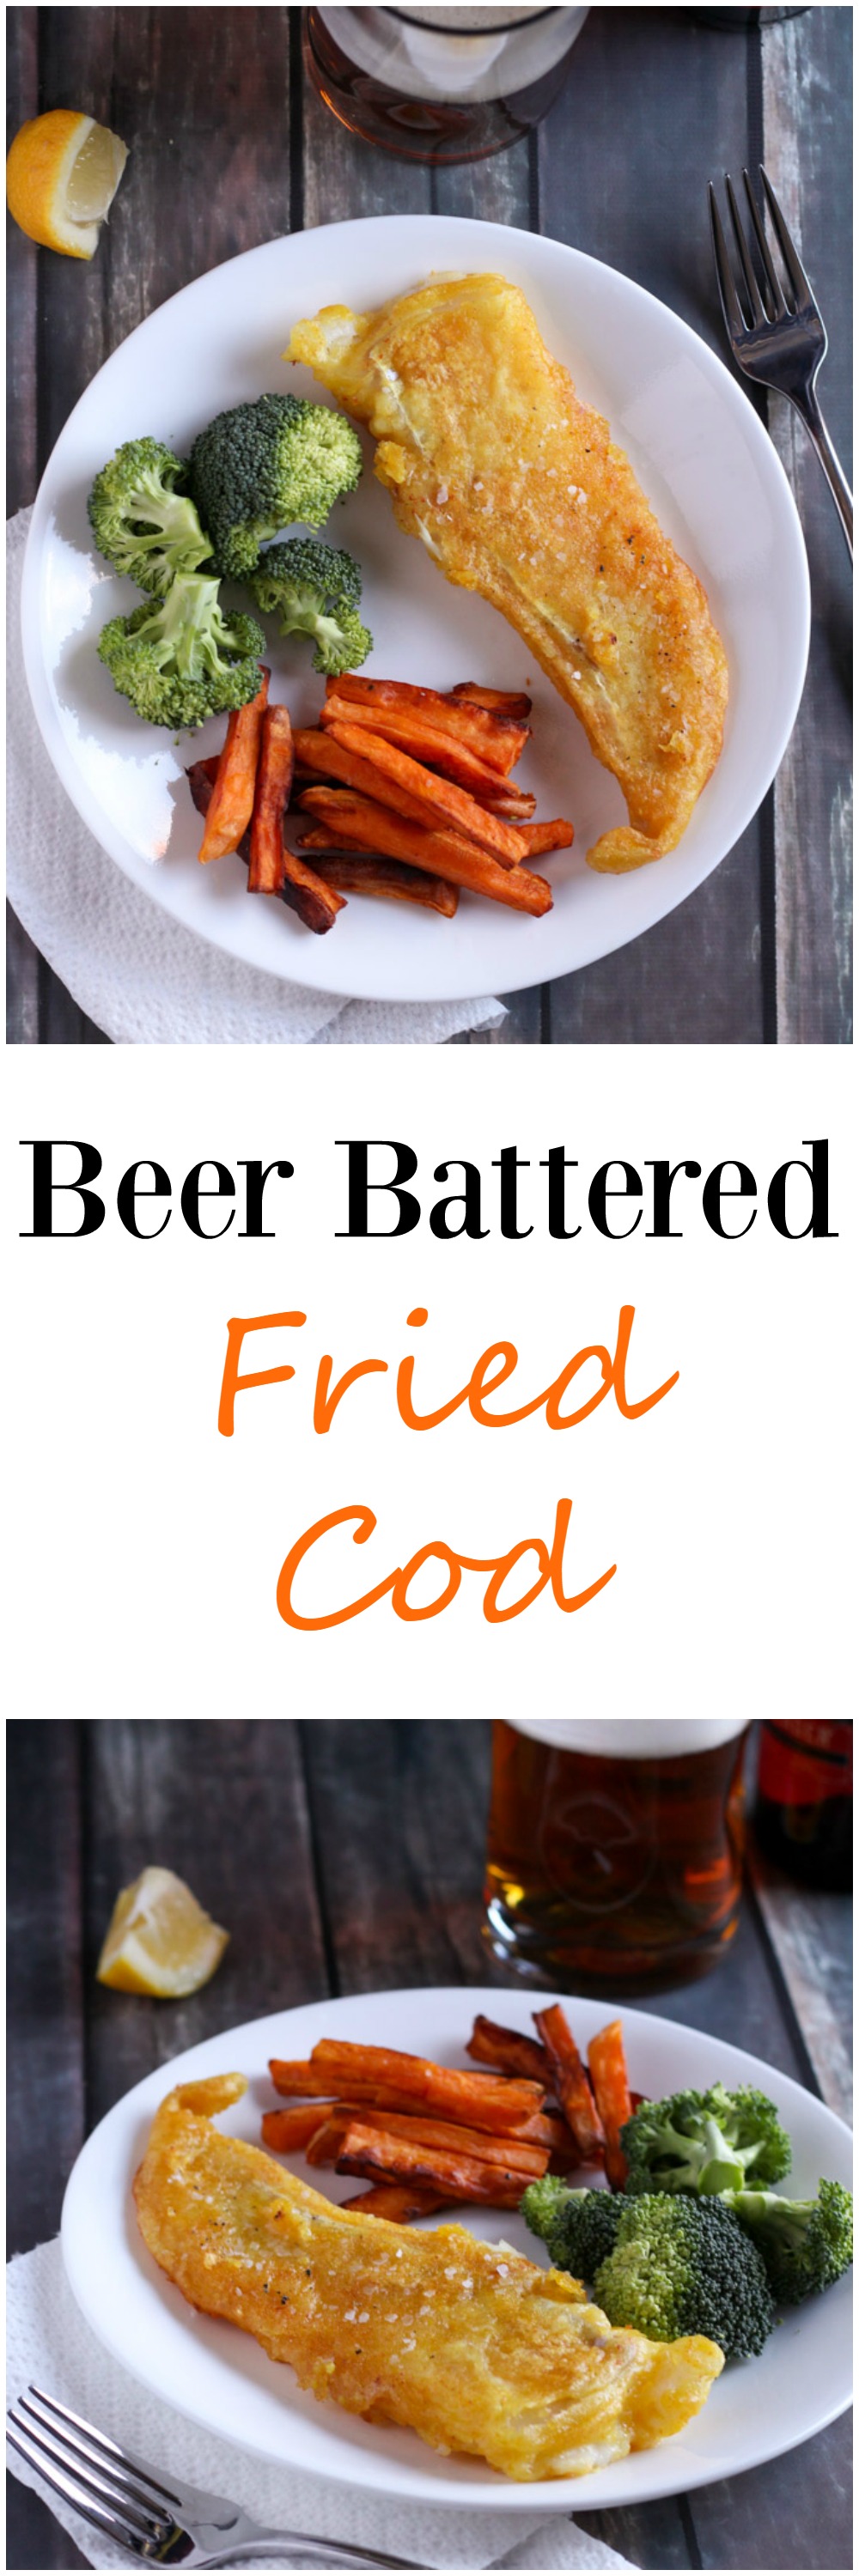 Beer battered fried cod is delicious, fairly easy, and brings pub food to your kitchen! Try it for dinner this week. www.cookingismessy.com